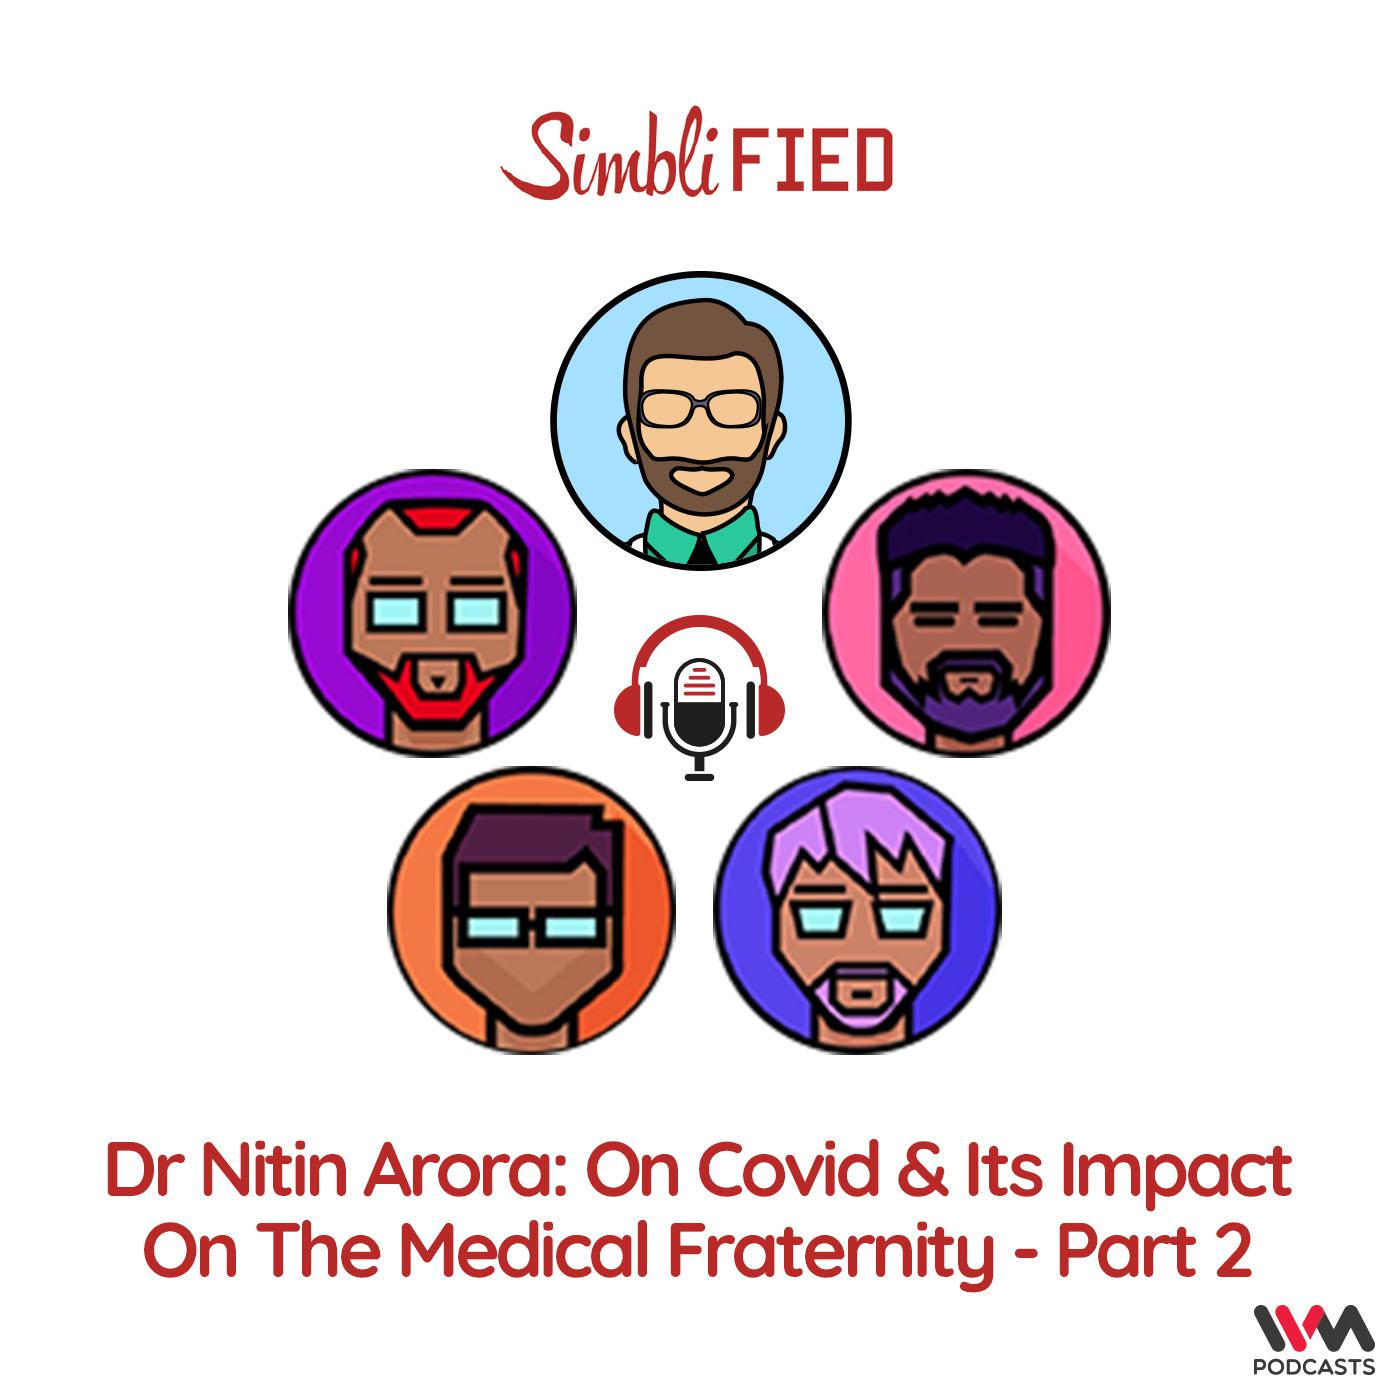 Dr Nitin Arora: On Covid & Its Impact On The Medical Fraternity - Part 2